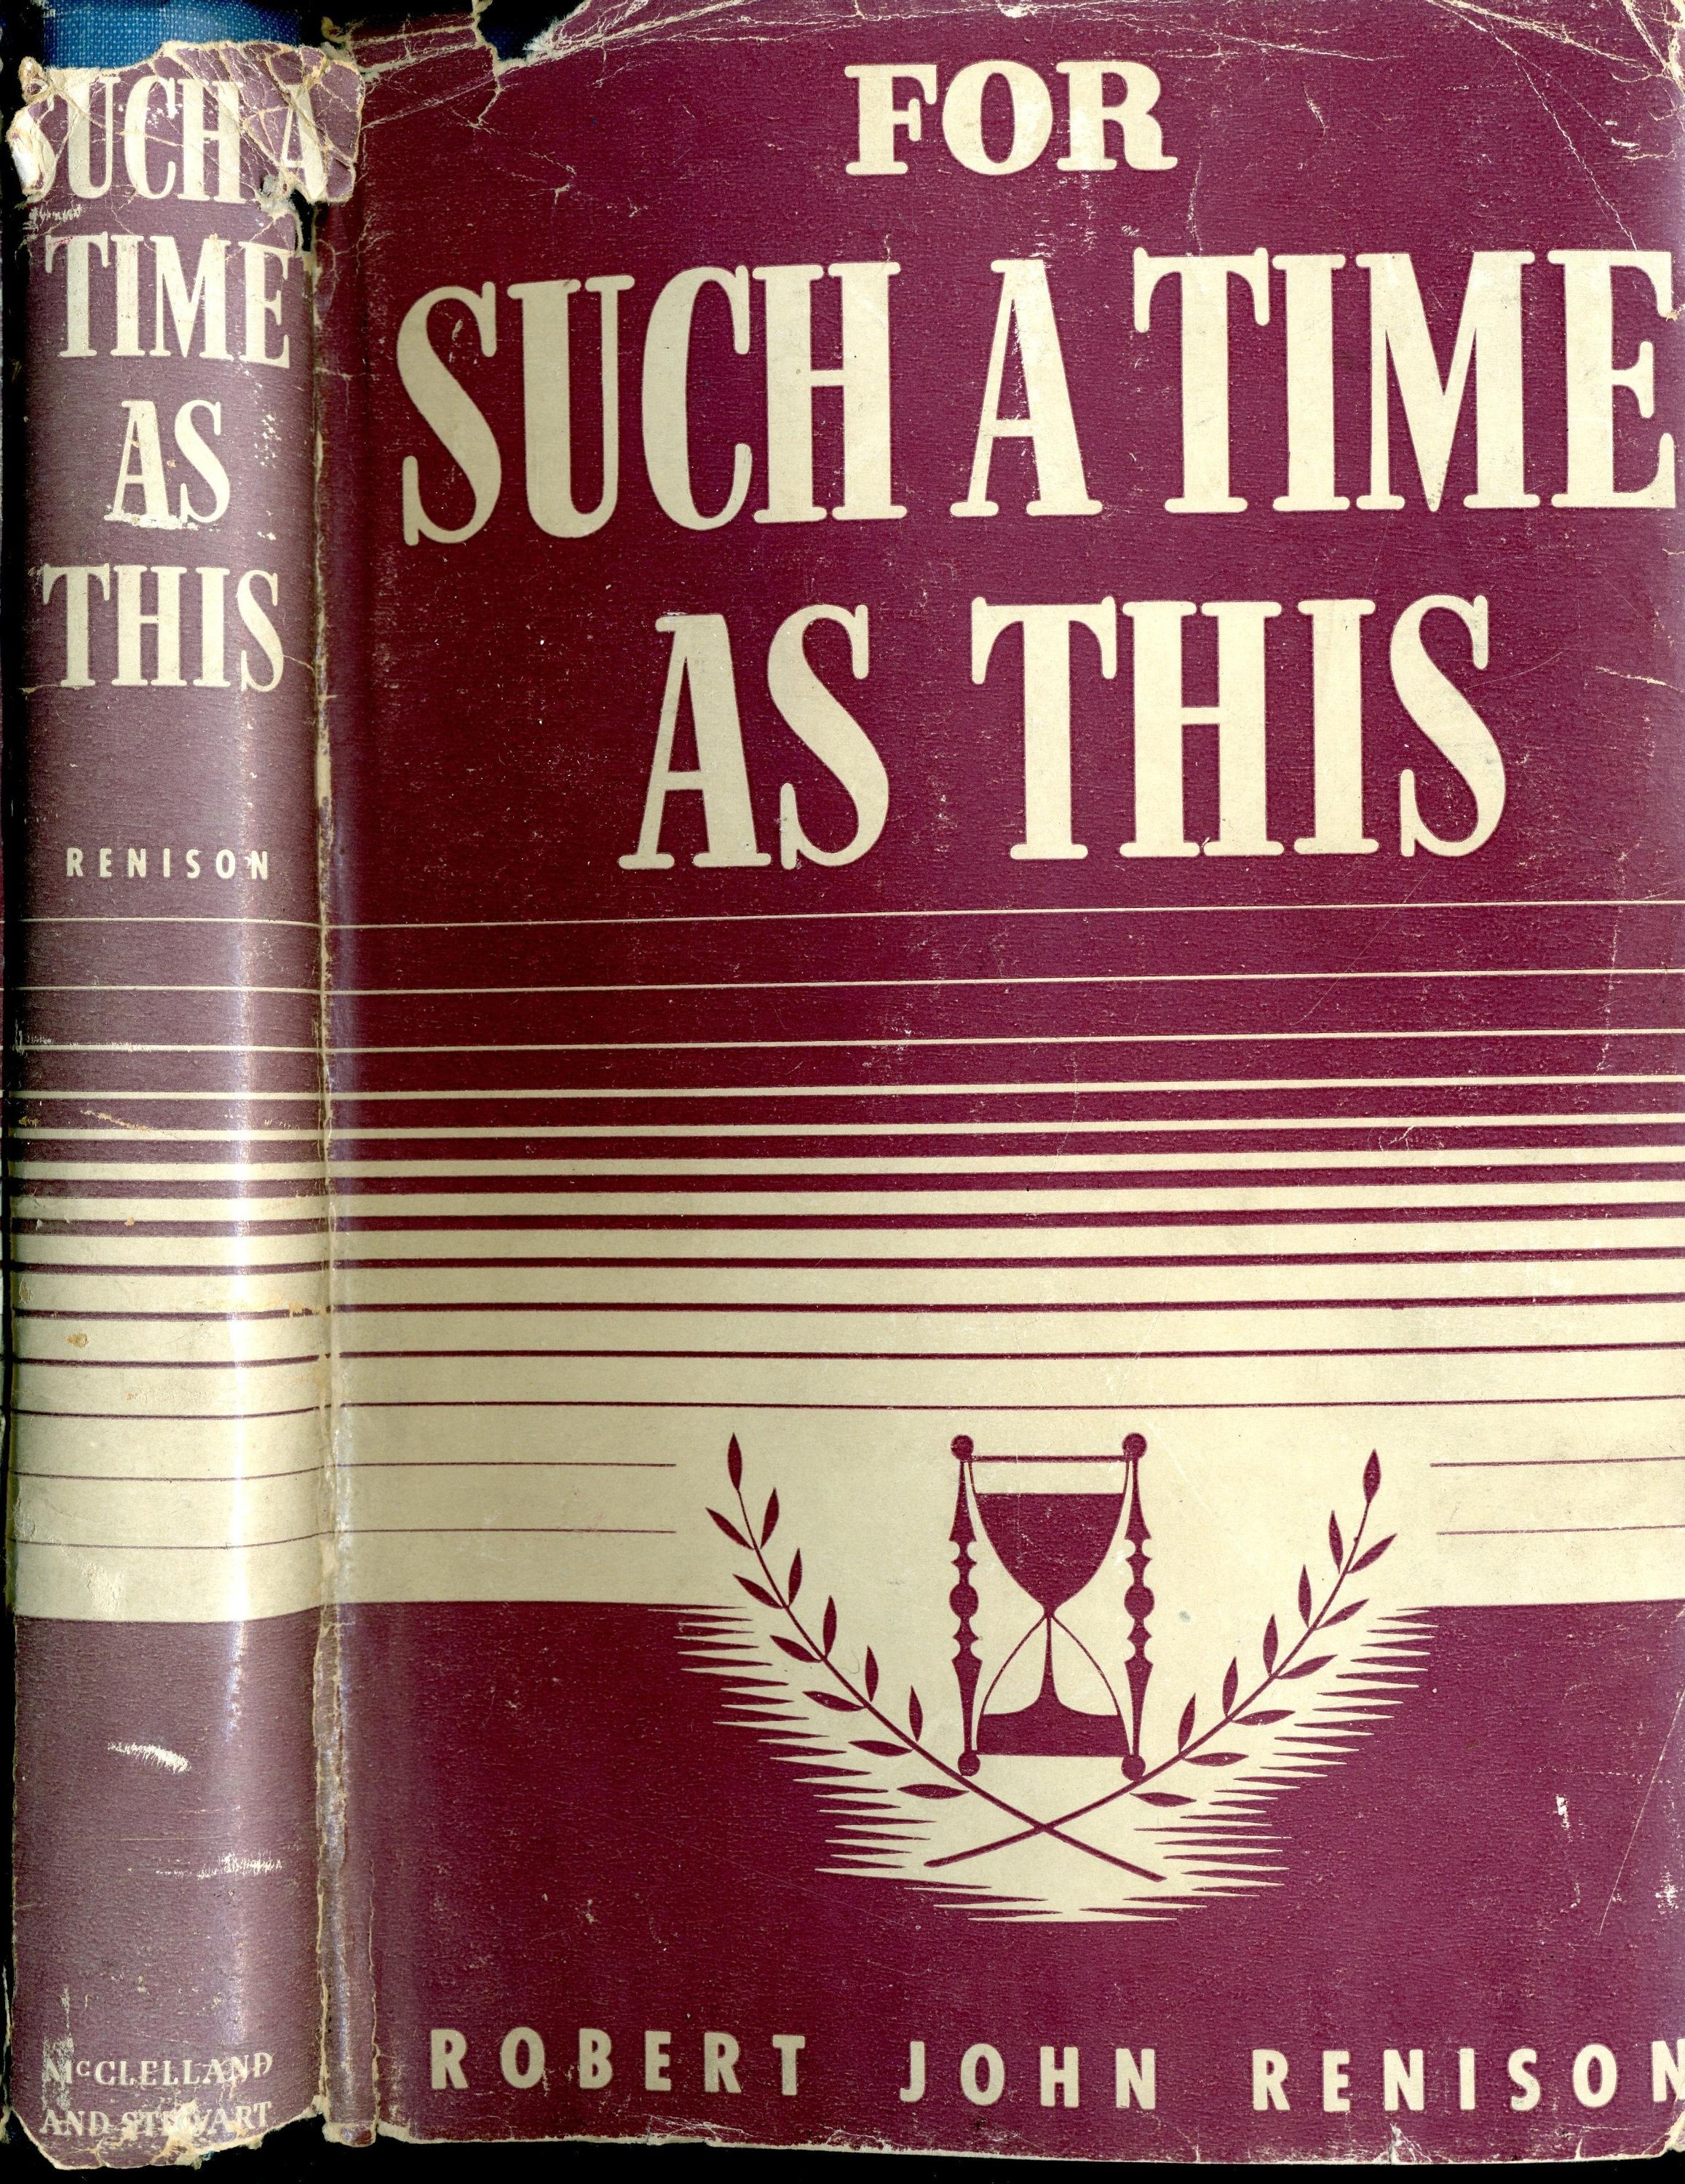 Cover of Bishop Renison’s book “For Such a Time as This”